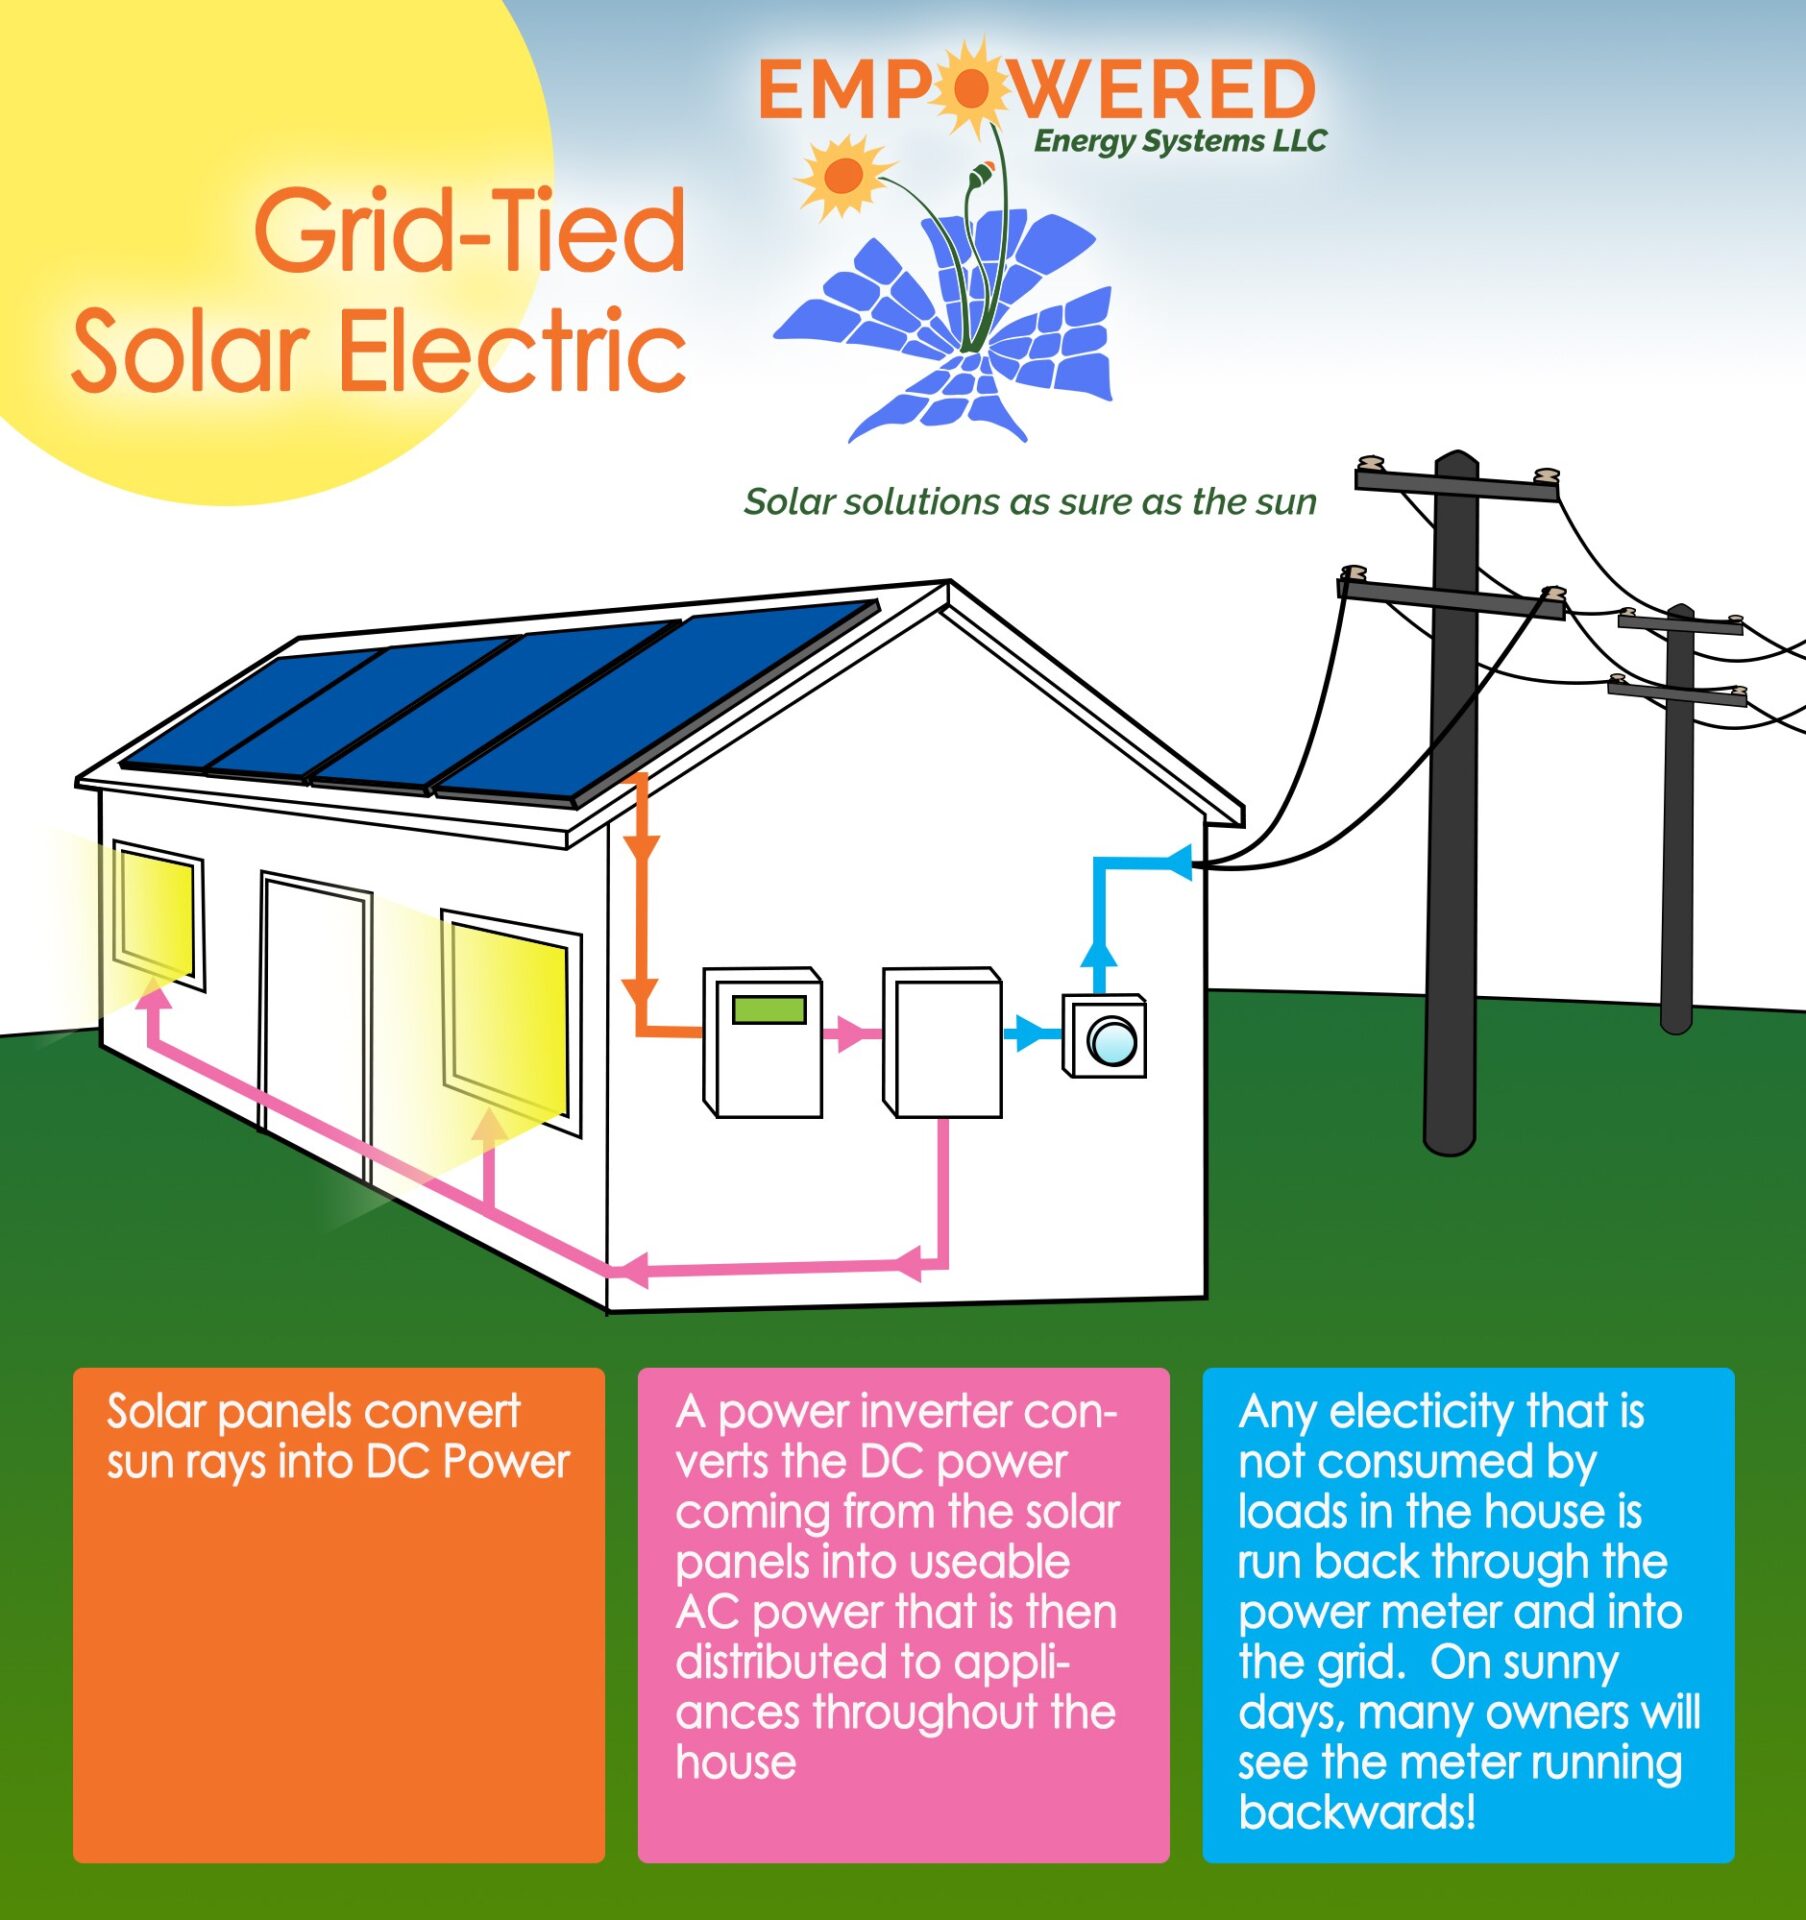 House of the Rising Sun: Residential Solar - Electrical Contractor